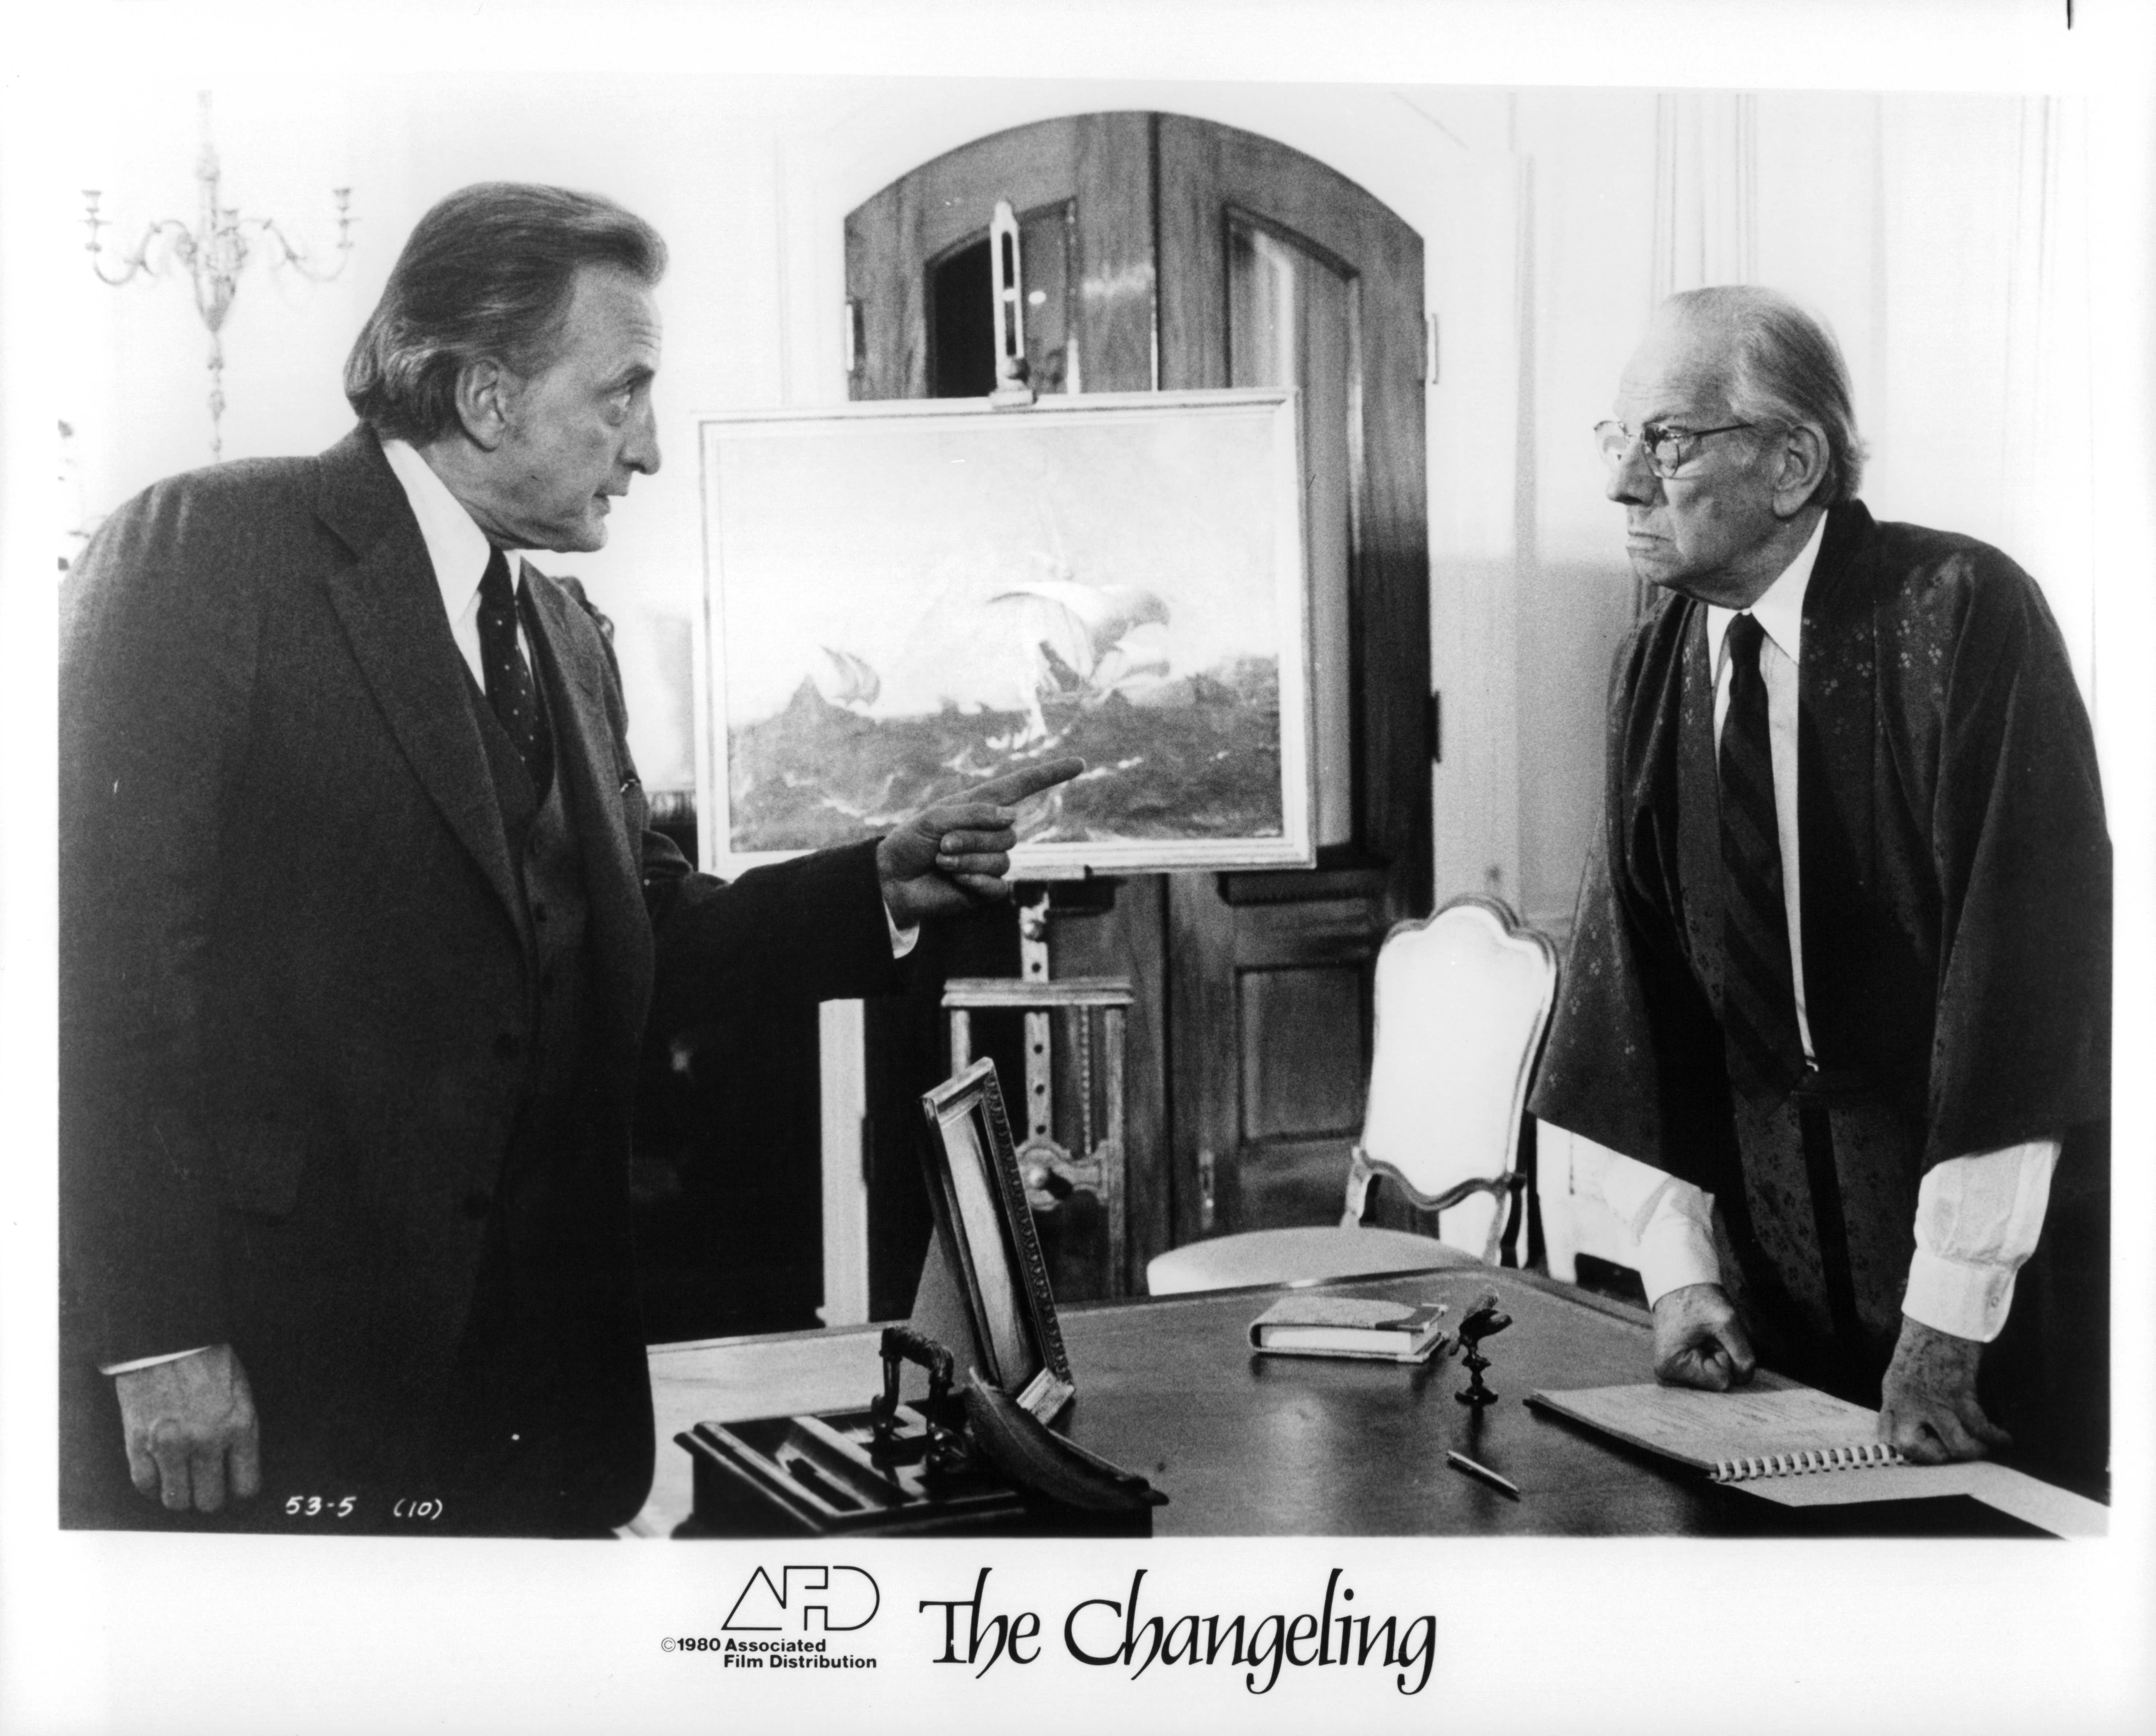 Still of George C. Scott and Melvyn Douglas in The Changeling (1980)